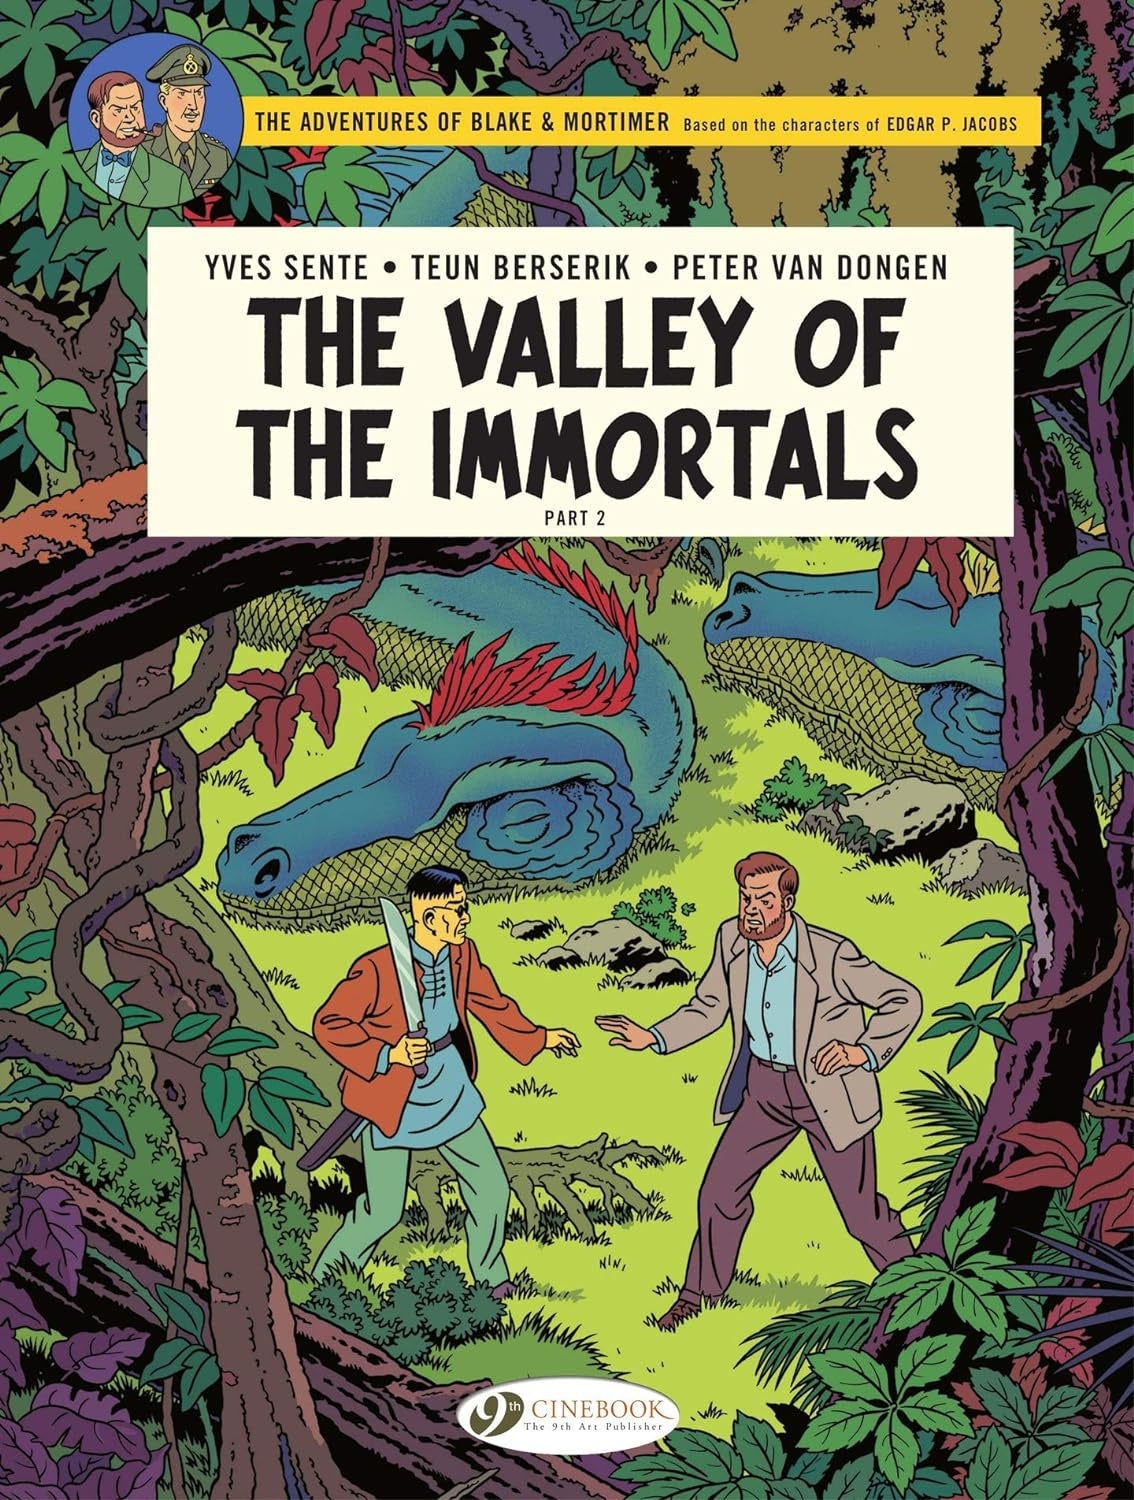 Blake & Mortimer 26 - The Valley of the Immortals Part 2